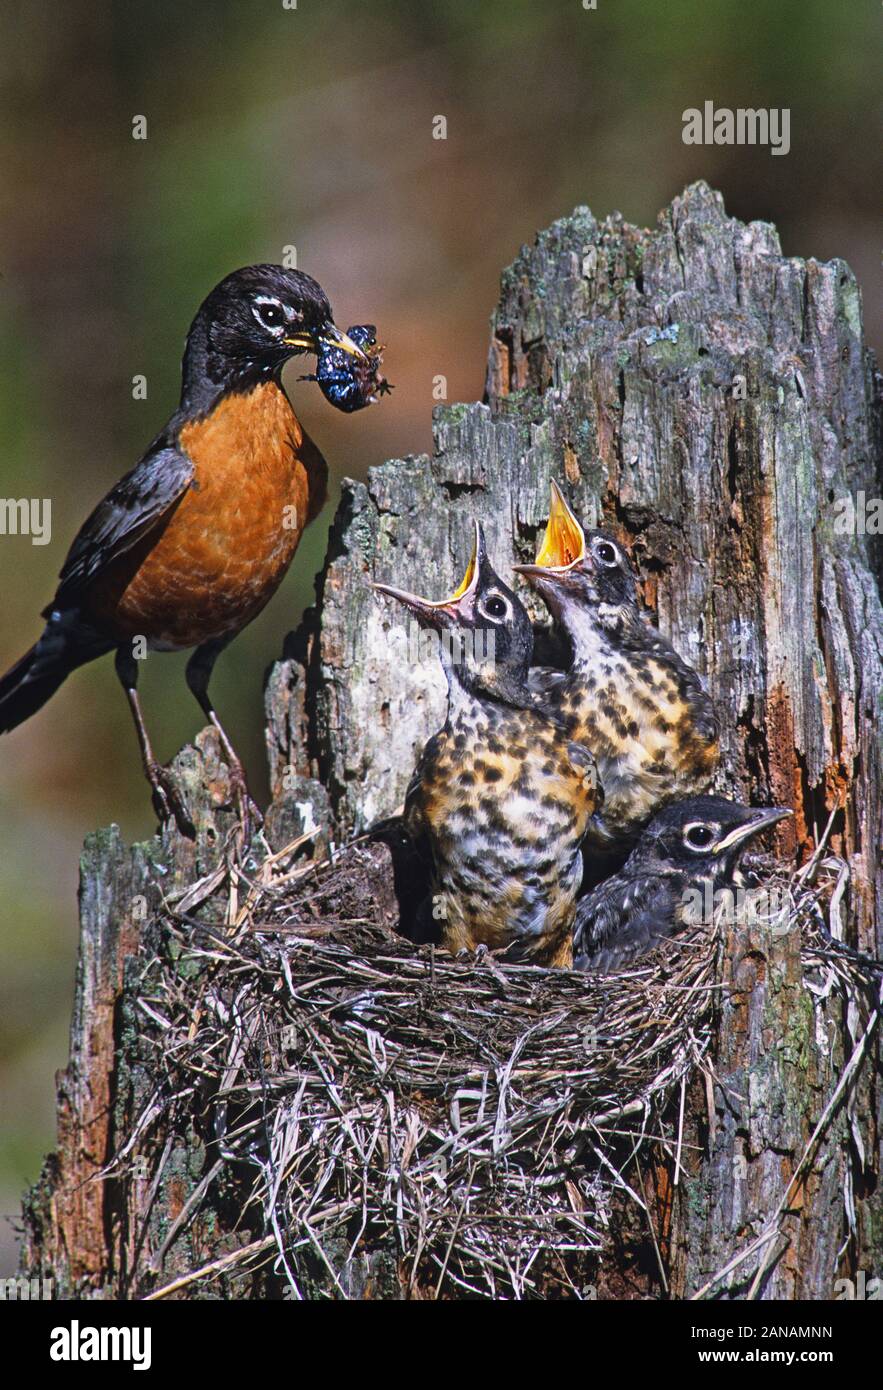 An American robin feeding young chicks at nest Stock Photo